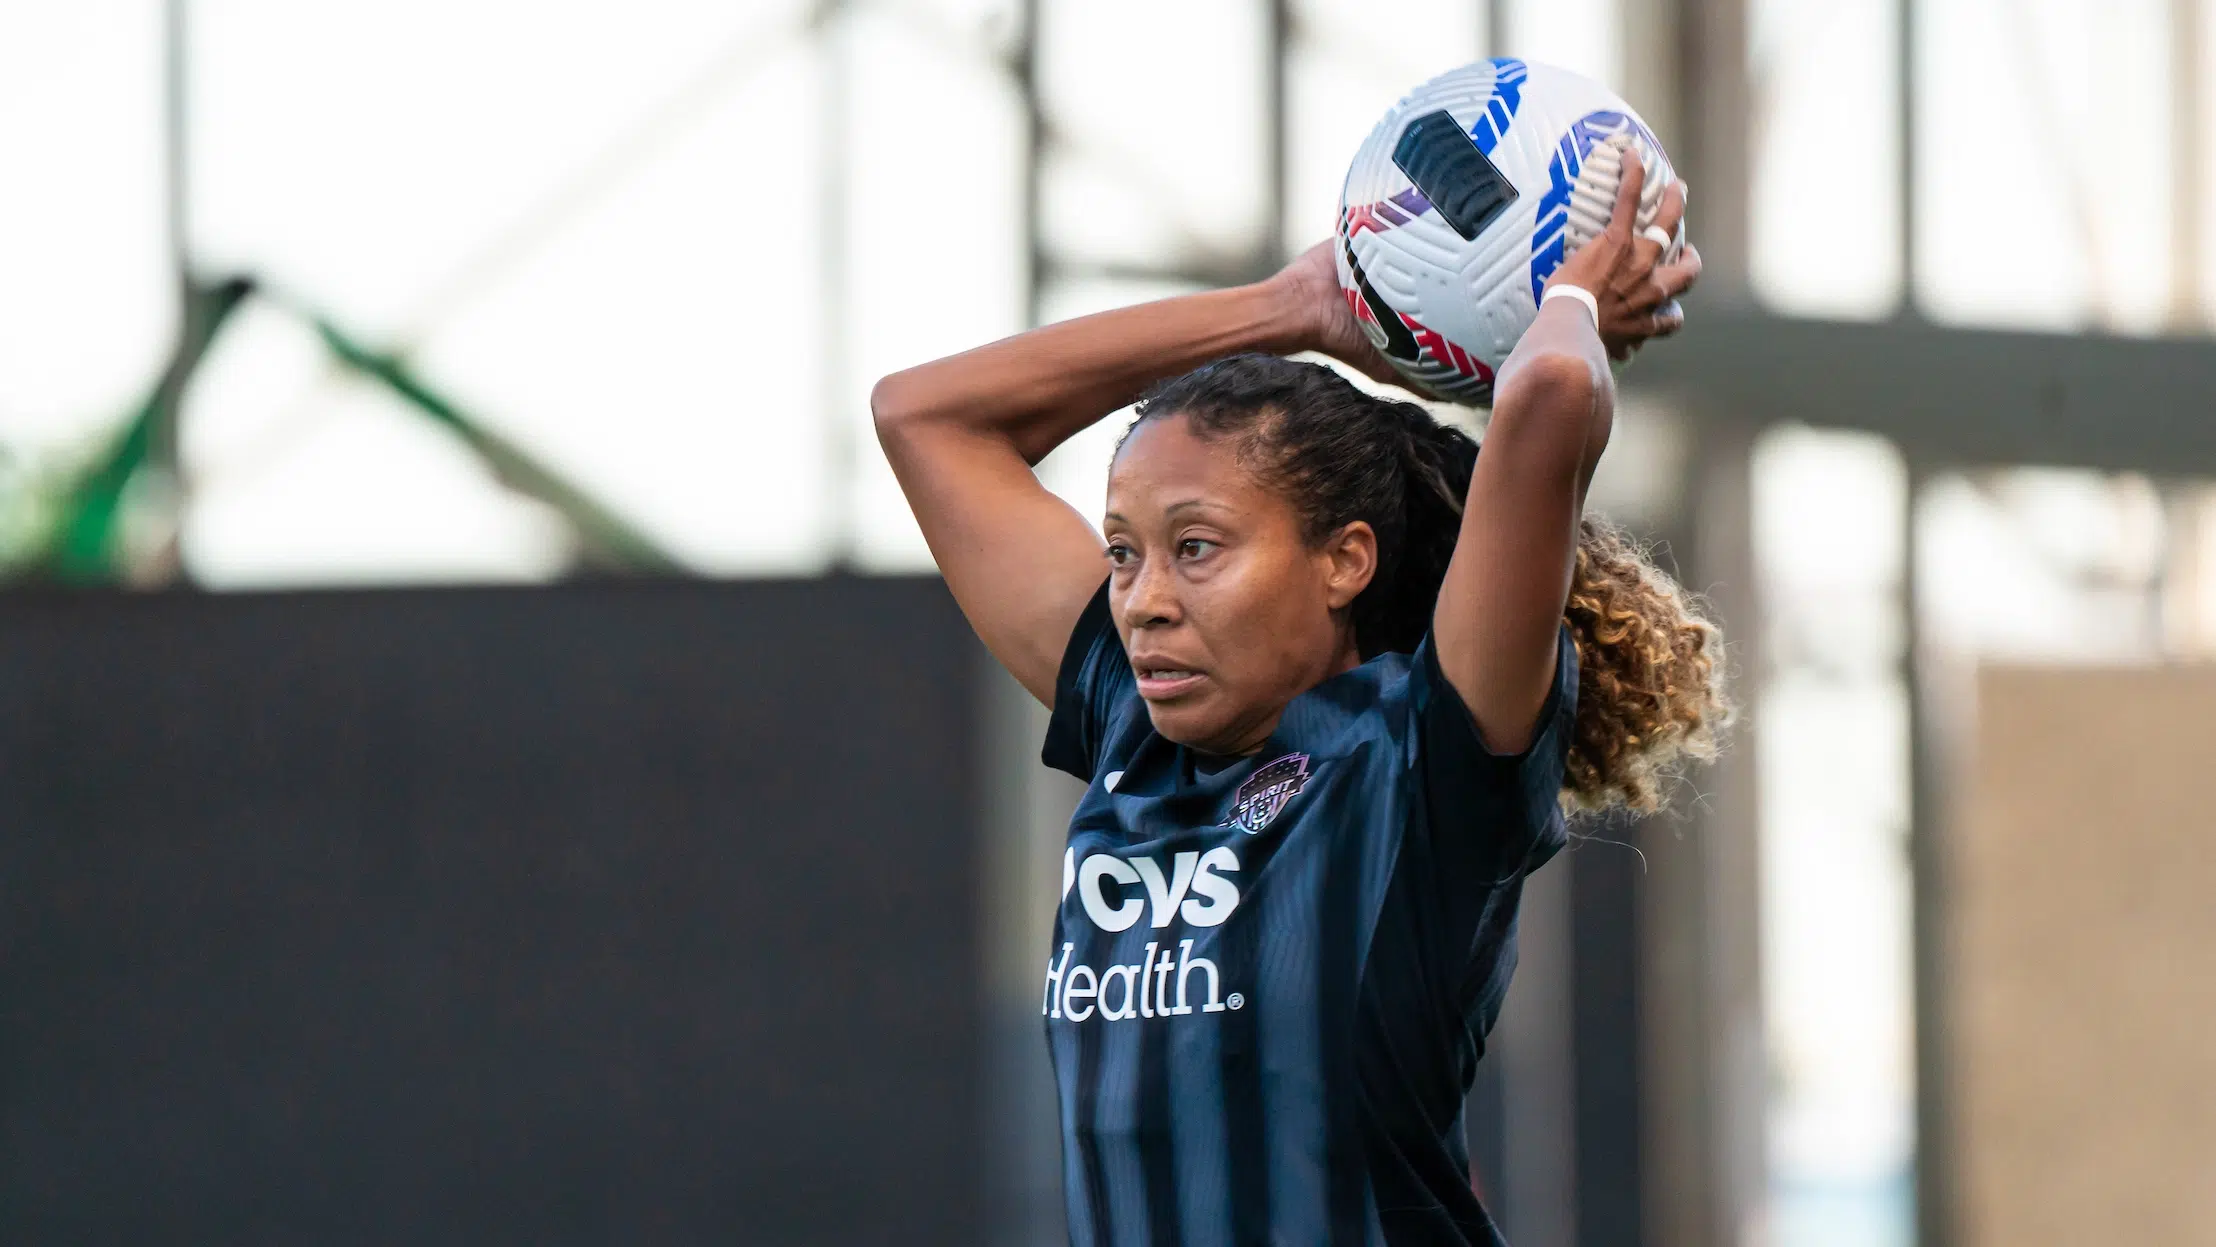 Casey Krueger in a black and gray striped jersey holds the soccer ball behind her head and prepares to throw.